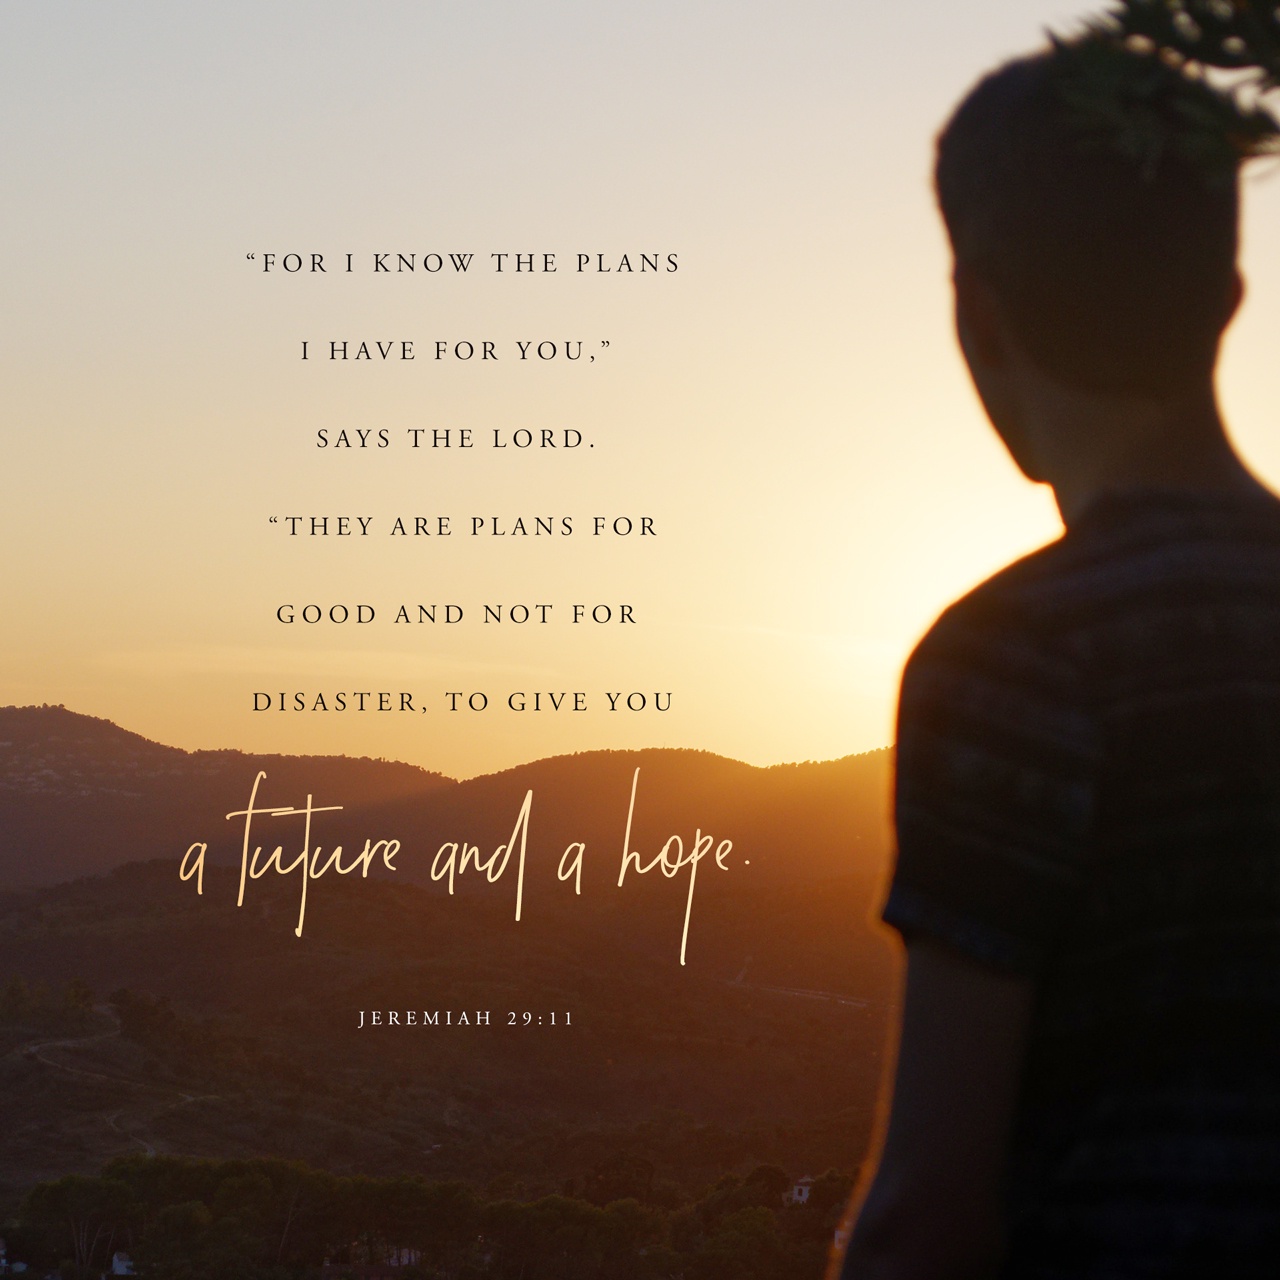 Jeremiah 29:11 For I know the plans I have for you, says the LORD, plans for welfare and not for evil, to give you a future and a hope. | Revised Standard Version (RSV) | Download The Bible App Now